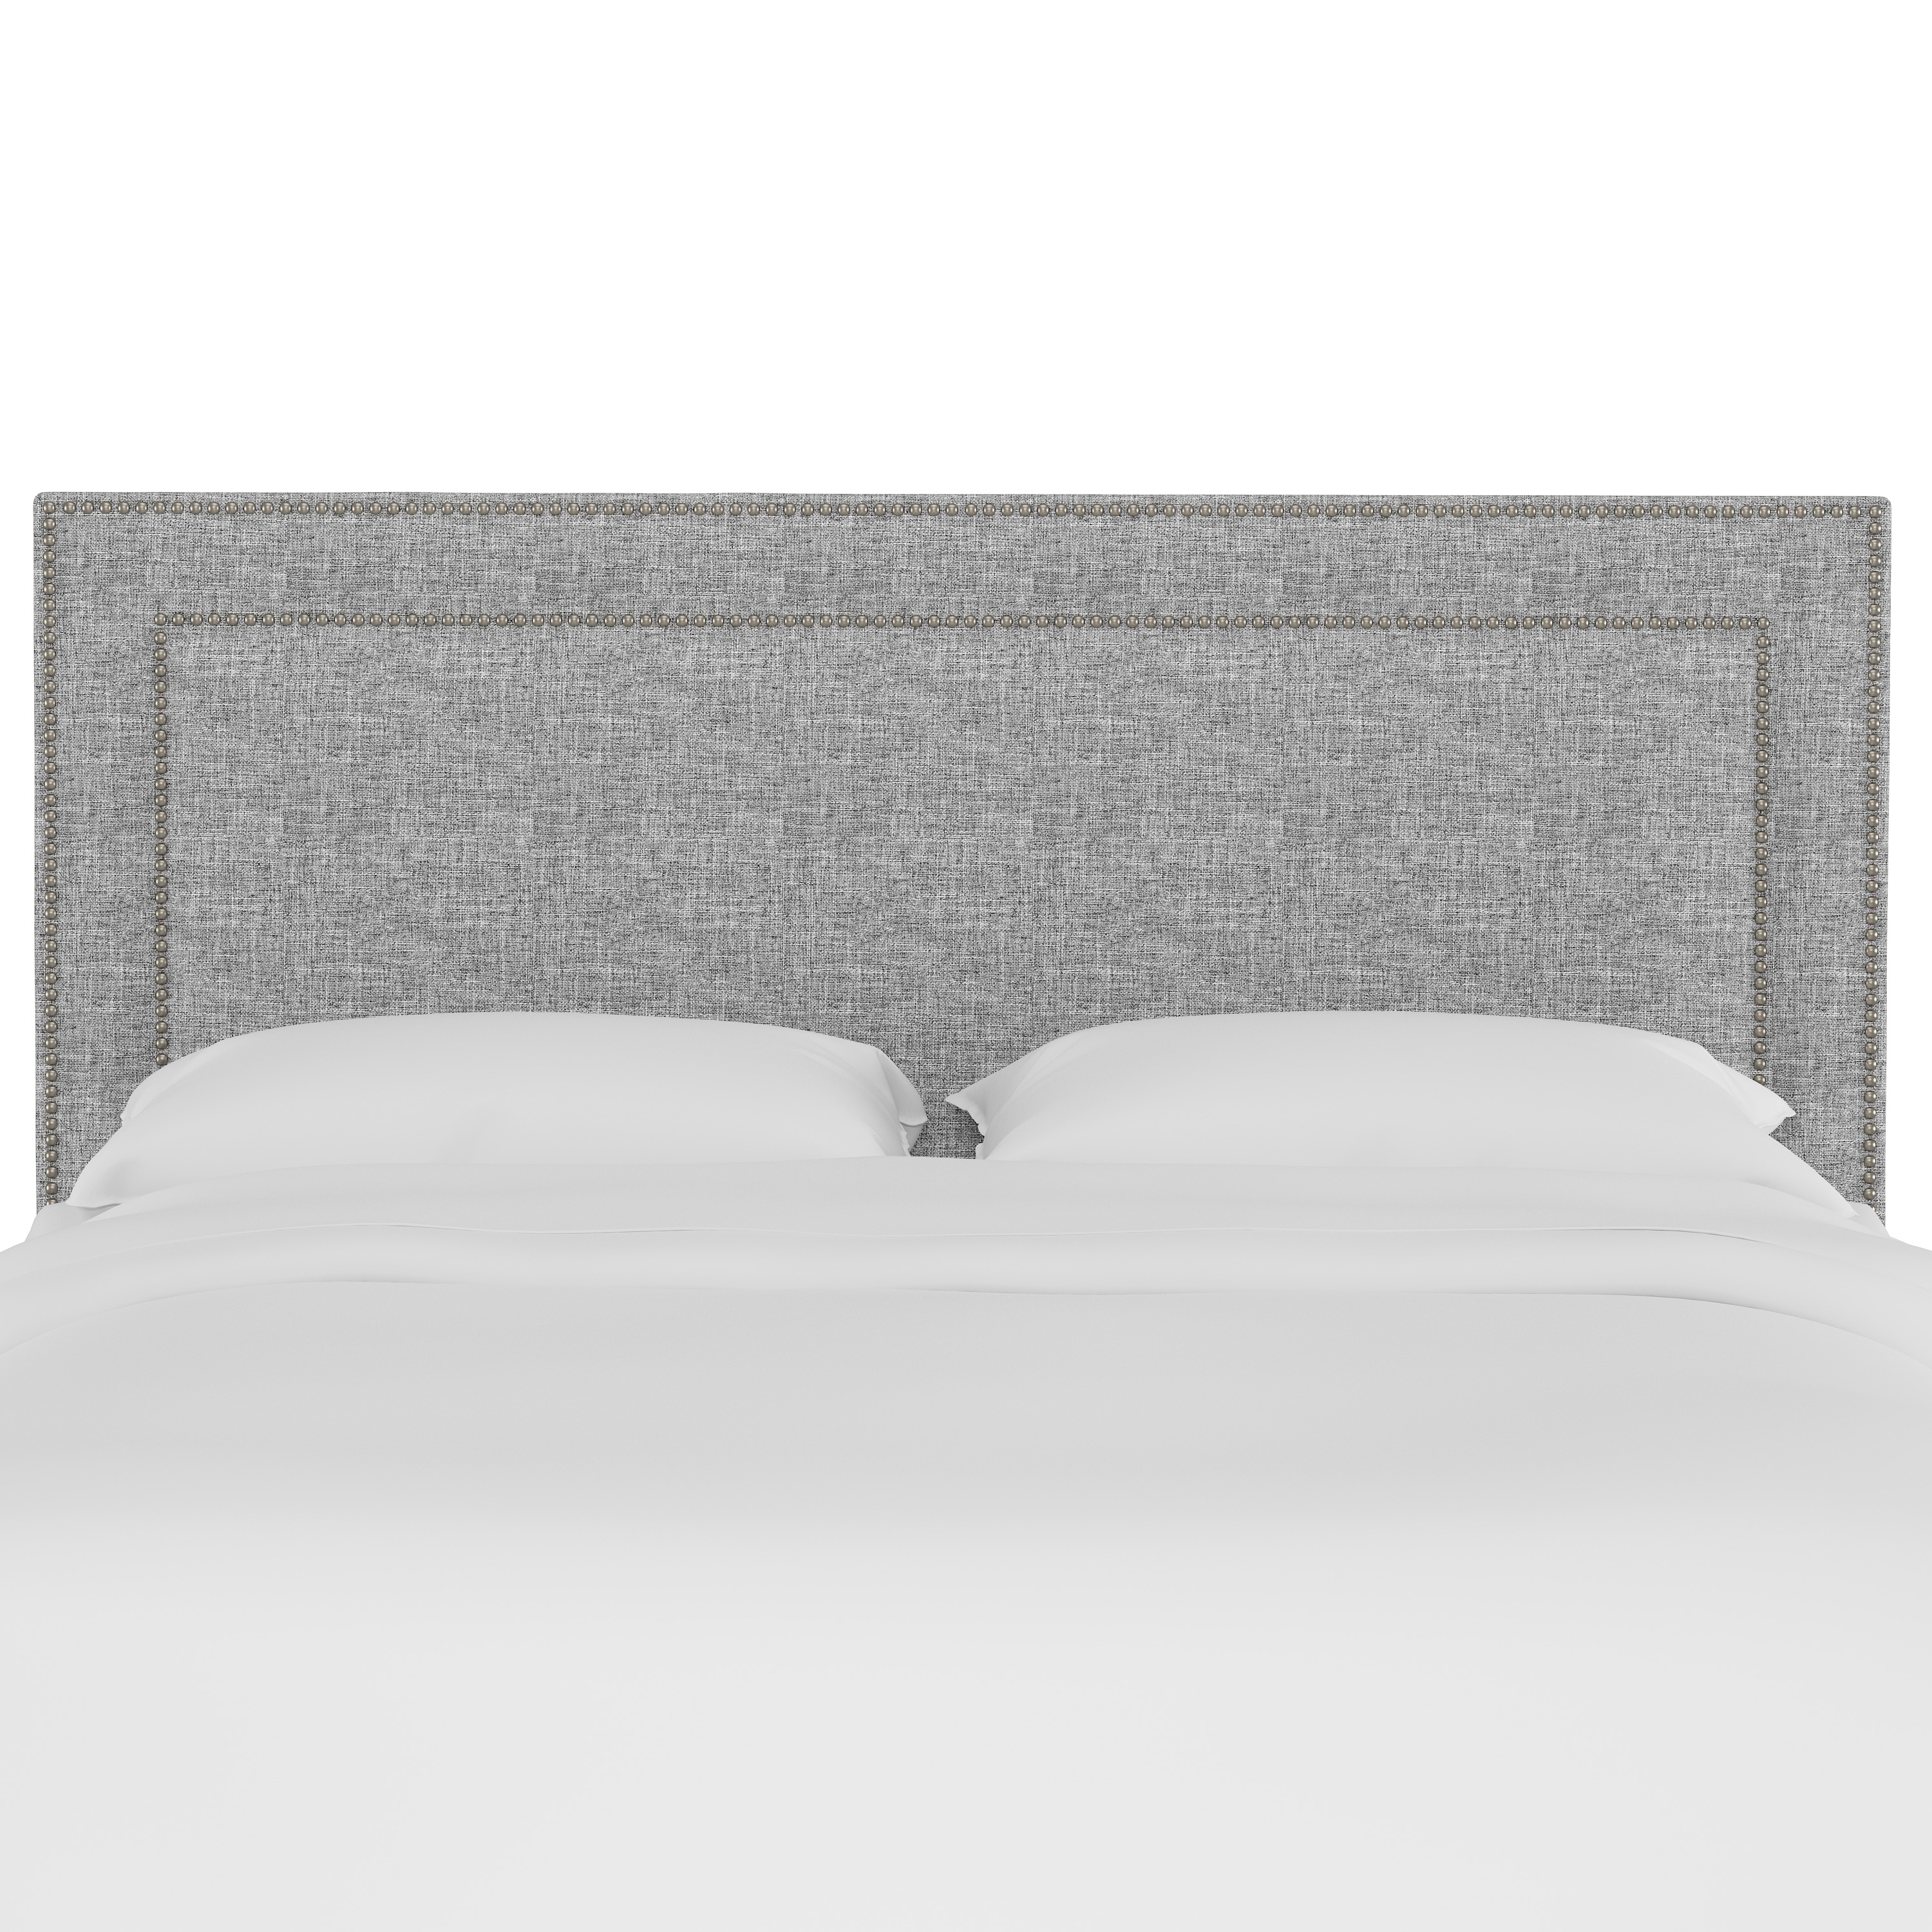 Queen Kimball Headboard, Pewter Nailheads - Image 1